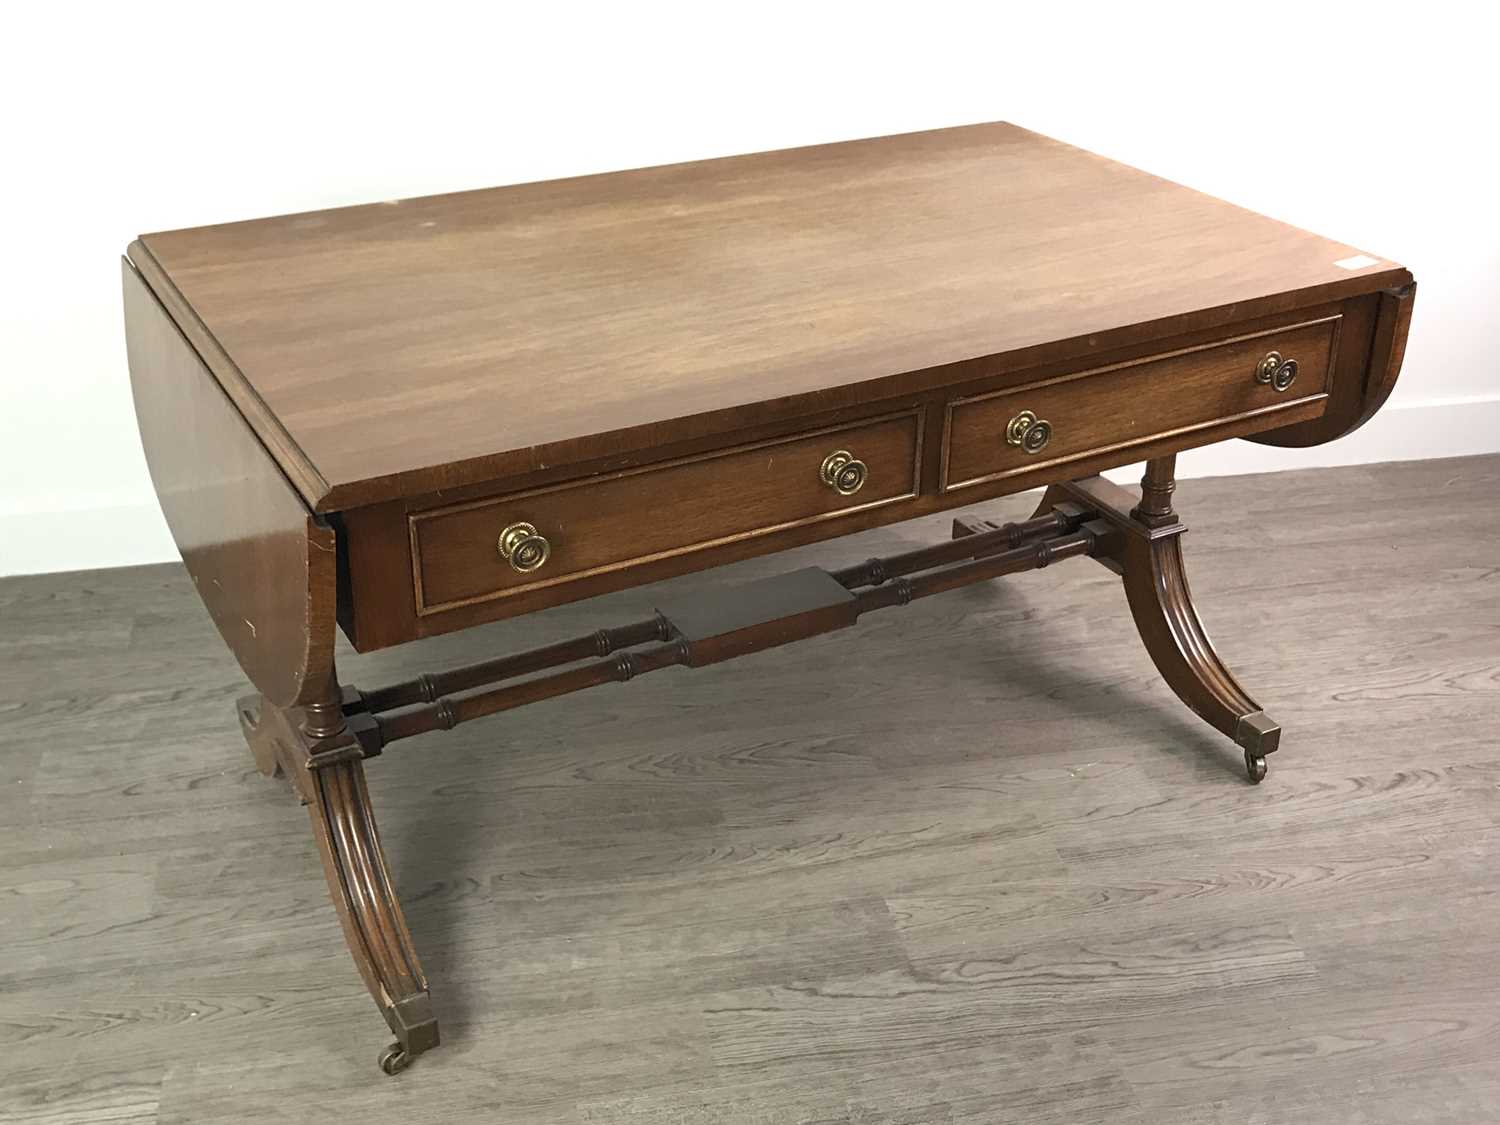 Lot 145 - A REPRODUCTION SOFA TYPE COFFEE TABLE